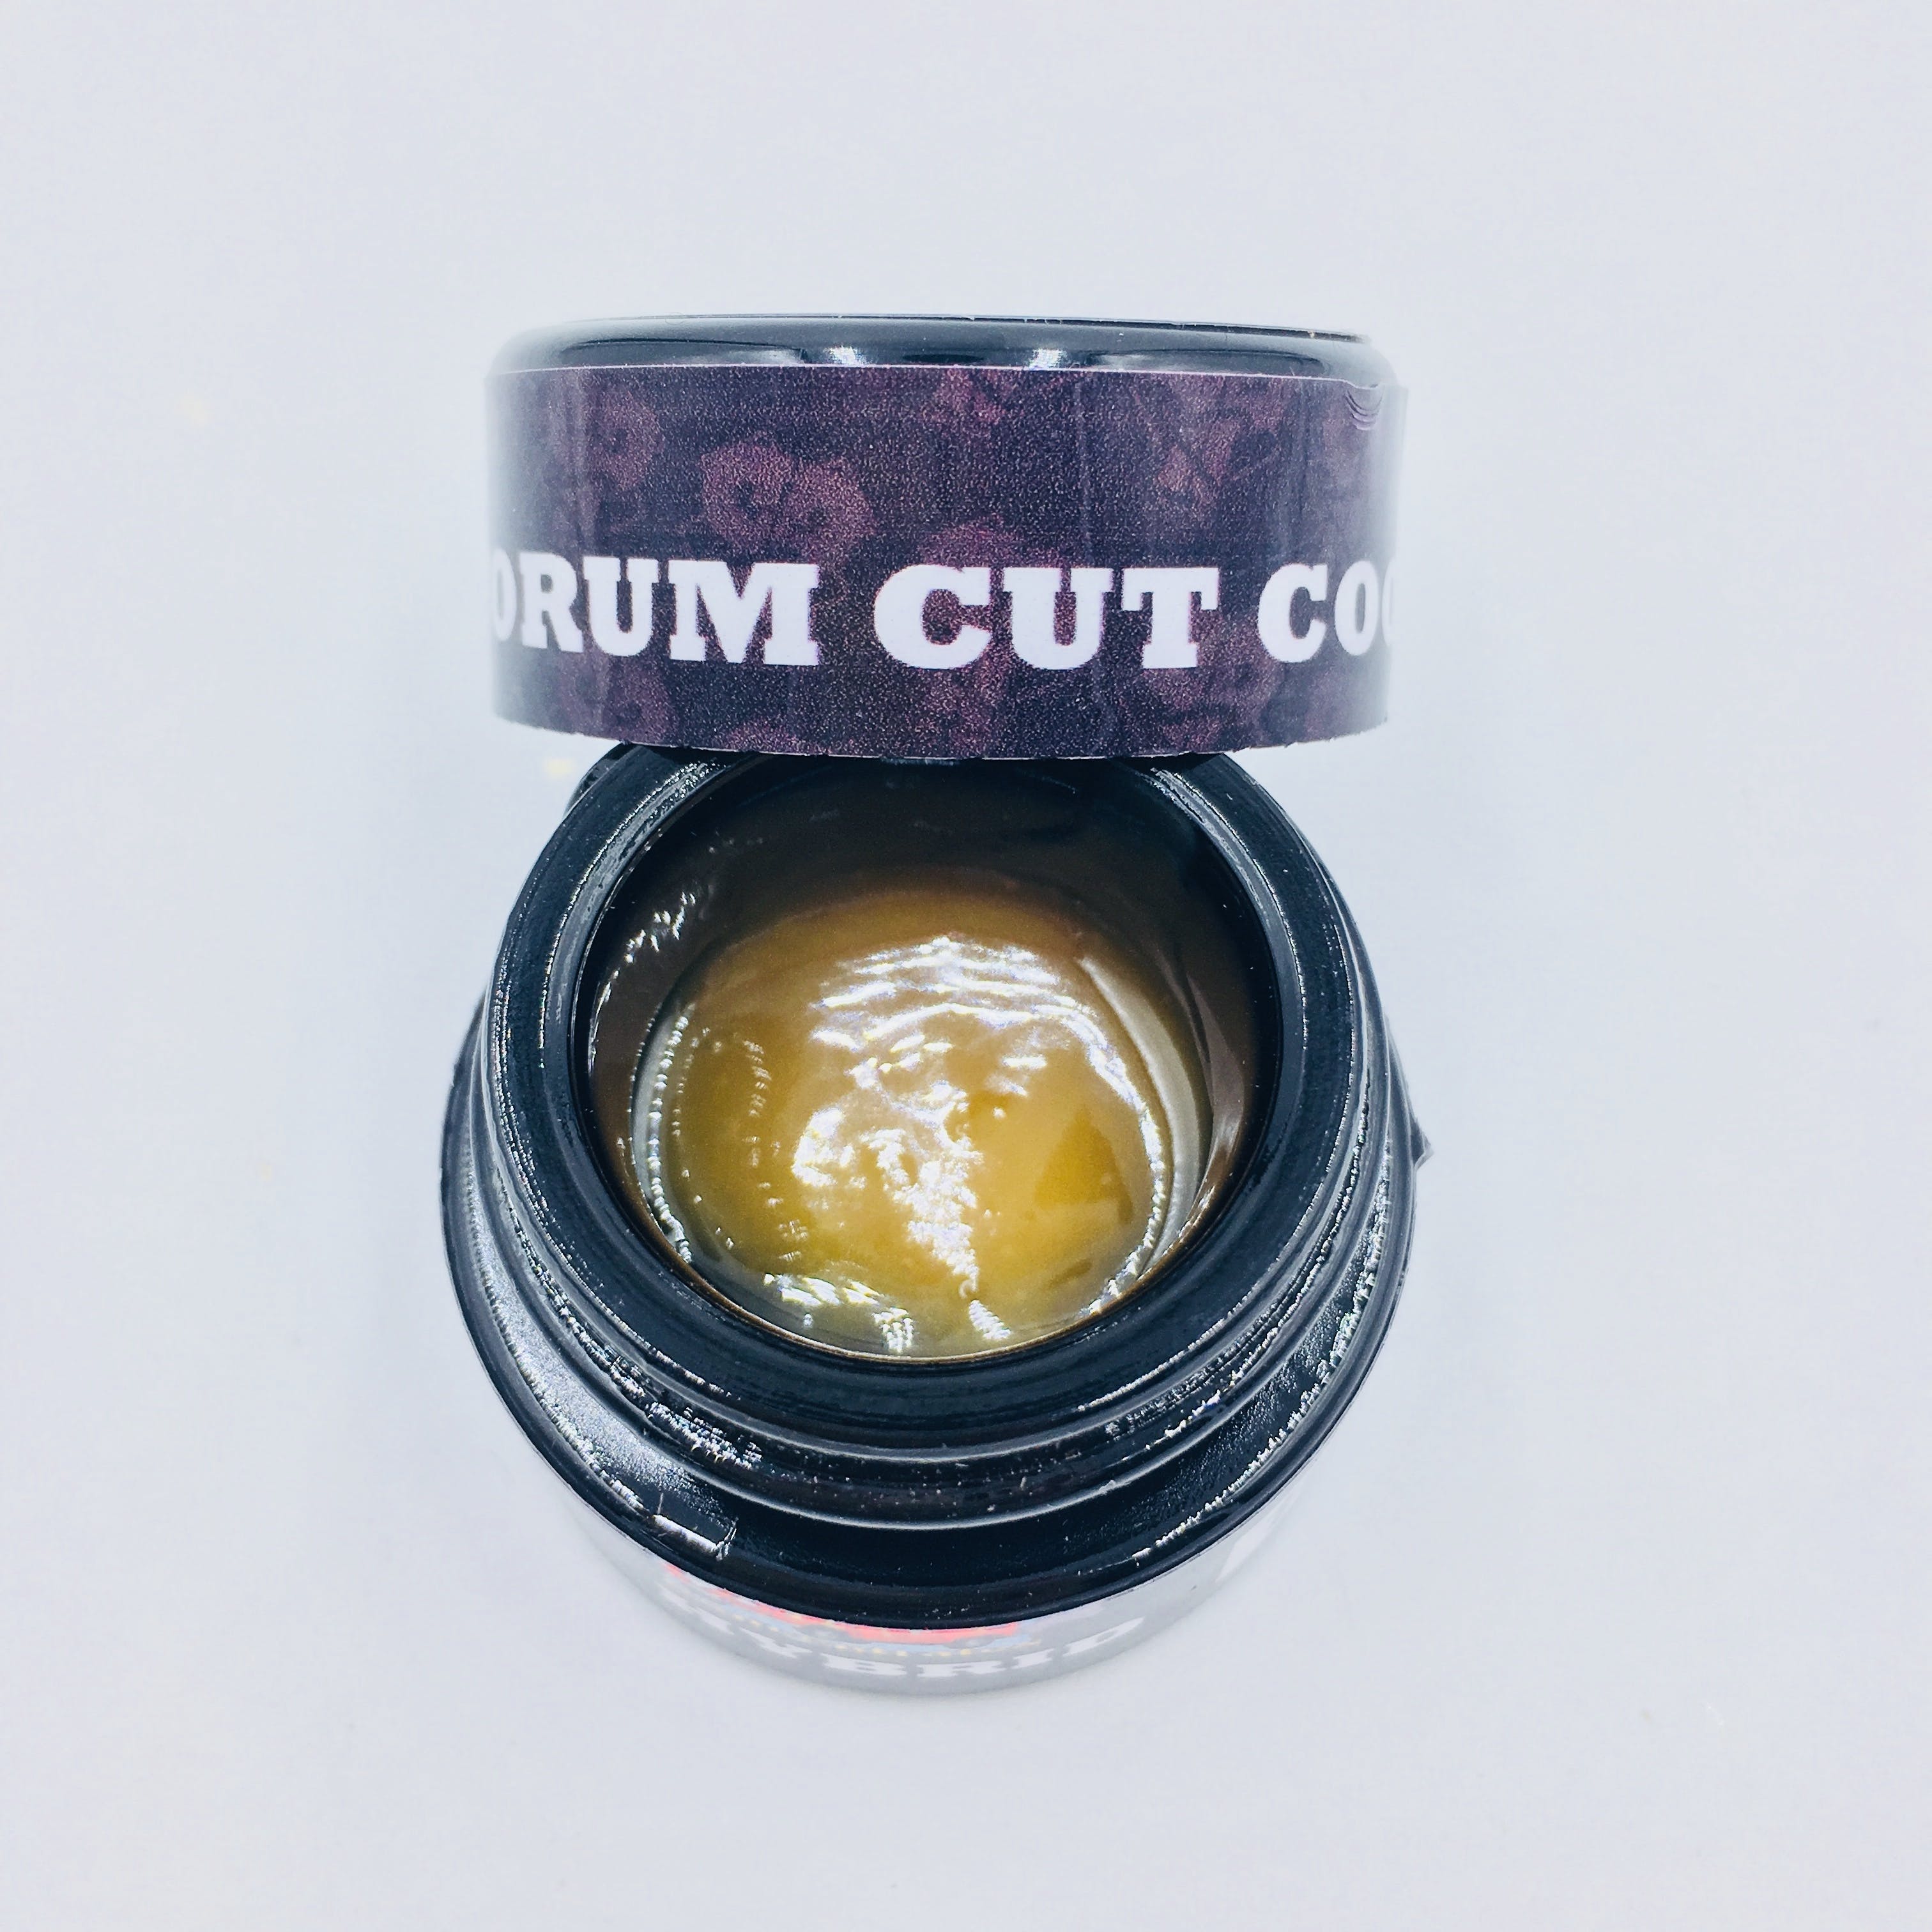 wax-travelling-high-concentrates-badder-forum-cookie